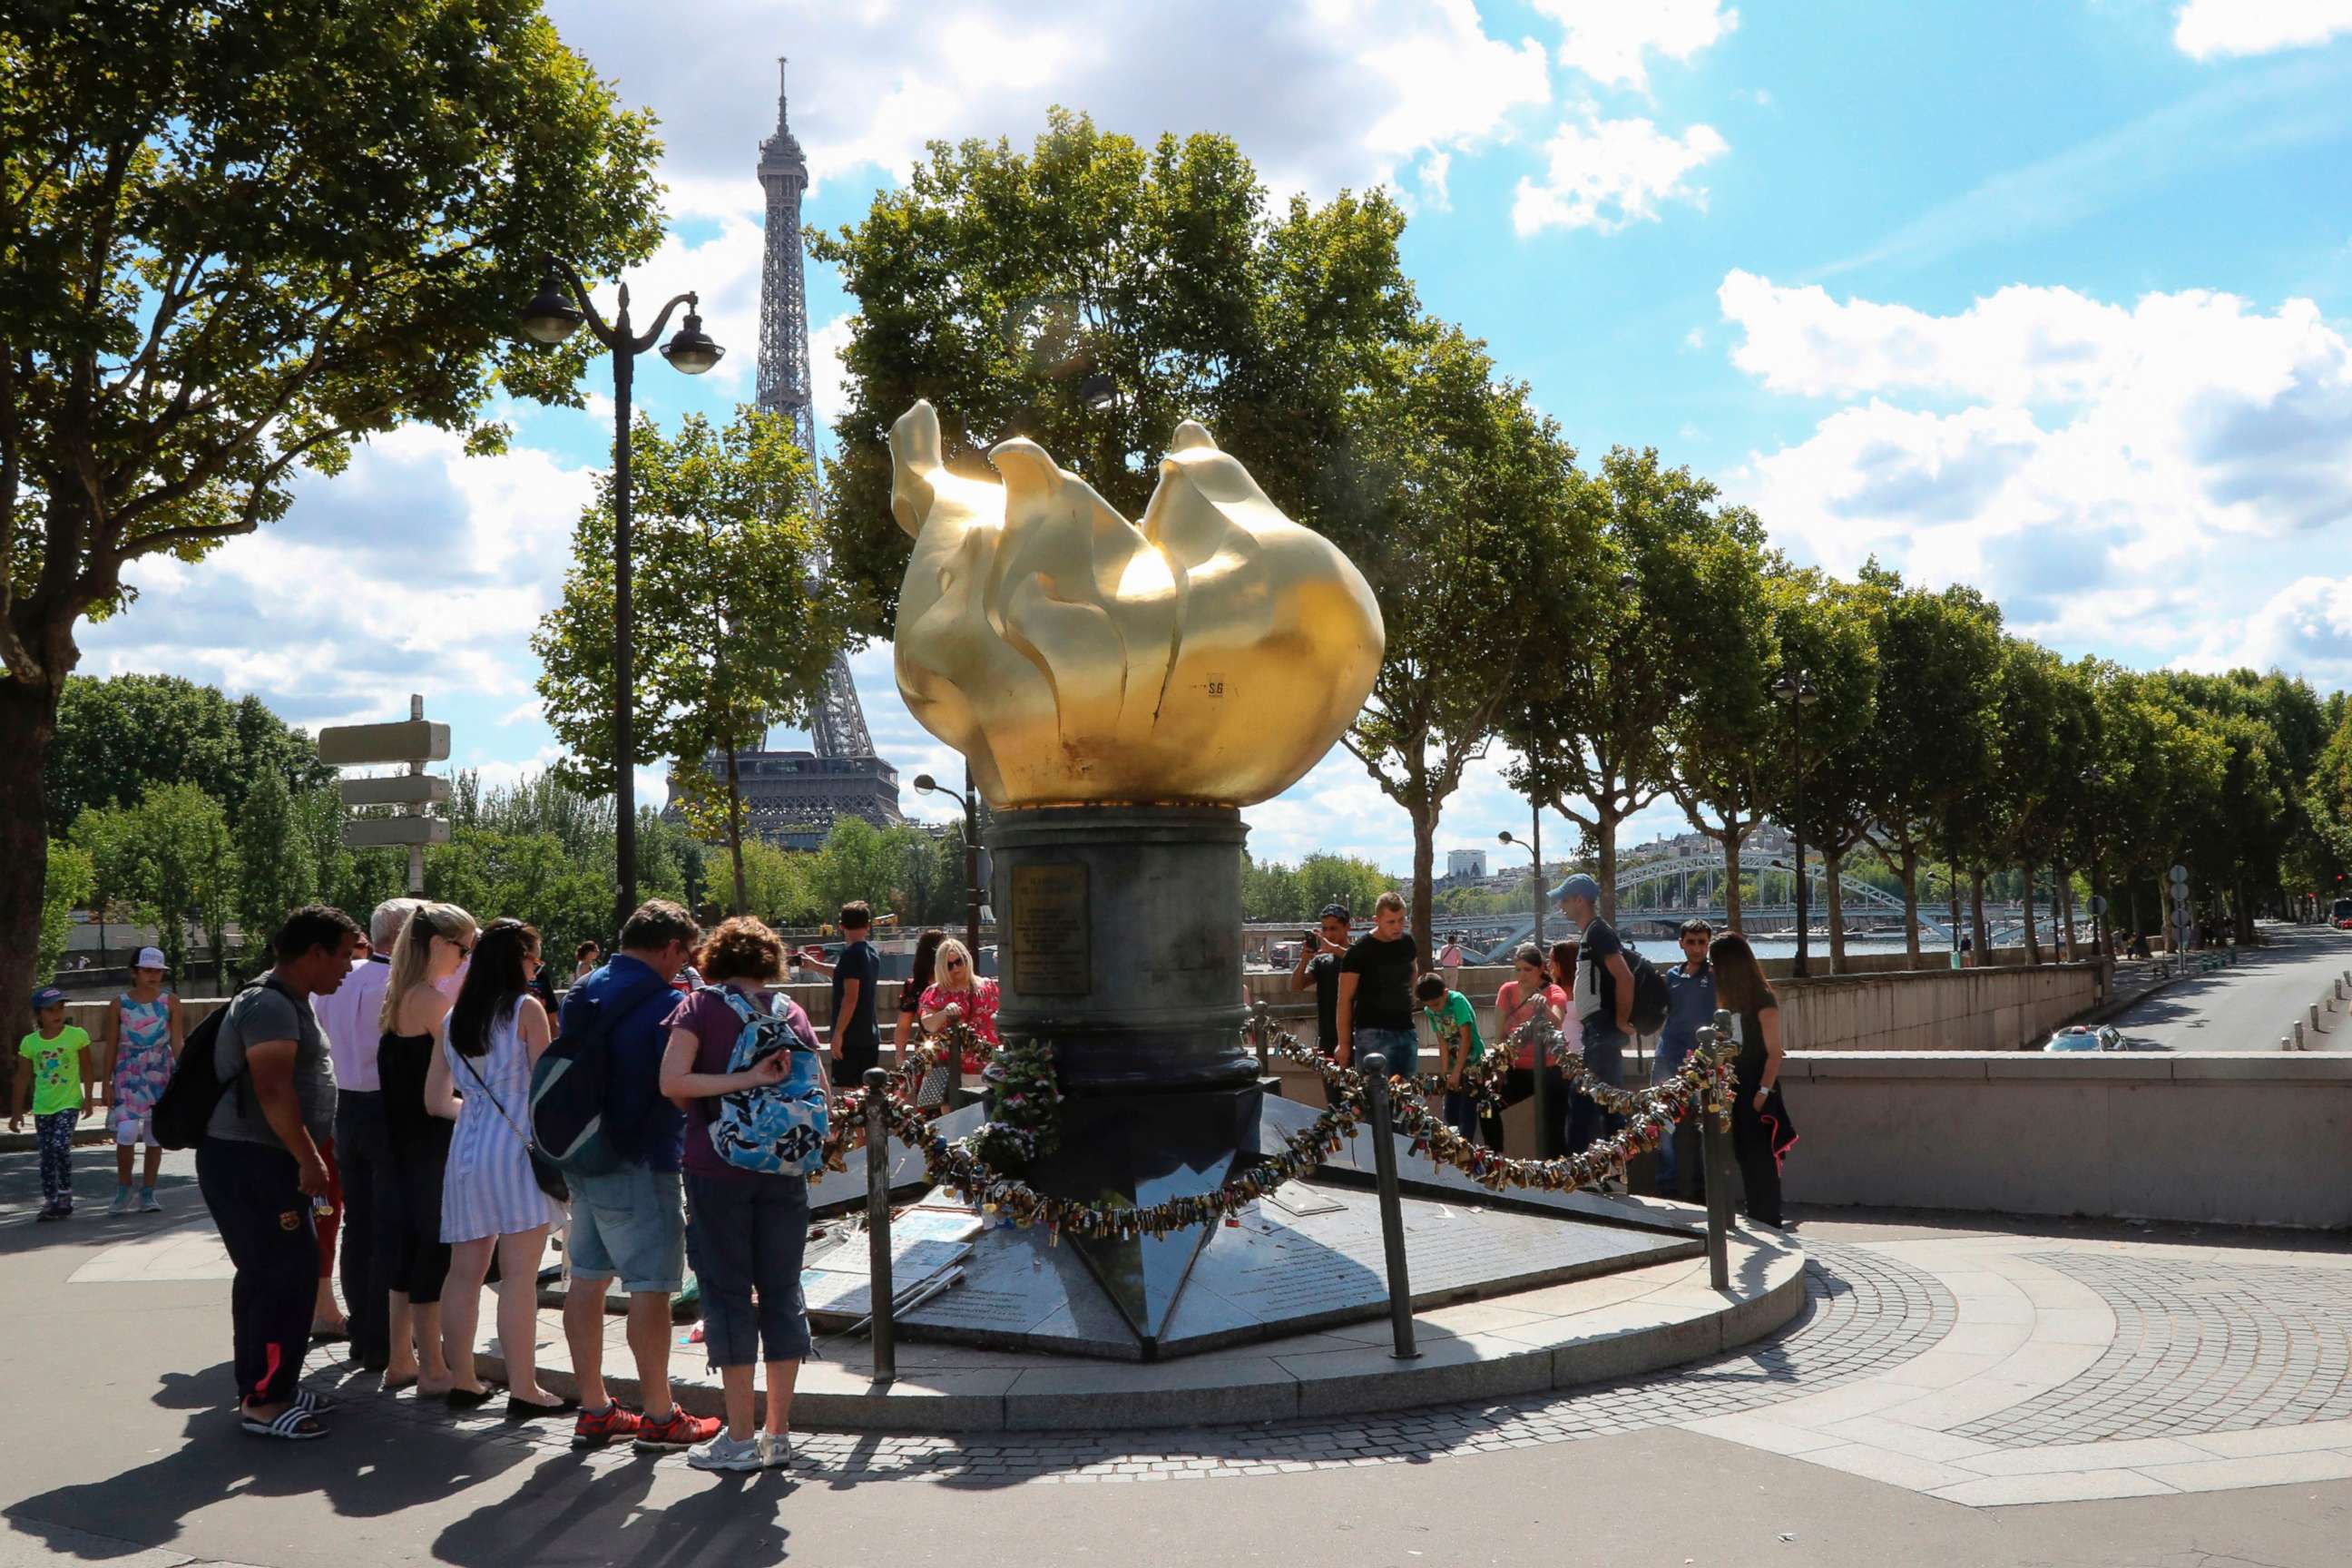 PHOTO: People walk around the "Liberty Flame" where fans memorialized Princess Diana after her death in Paris, Aug. 31, 2017.